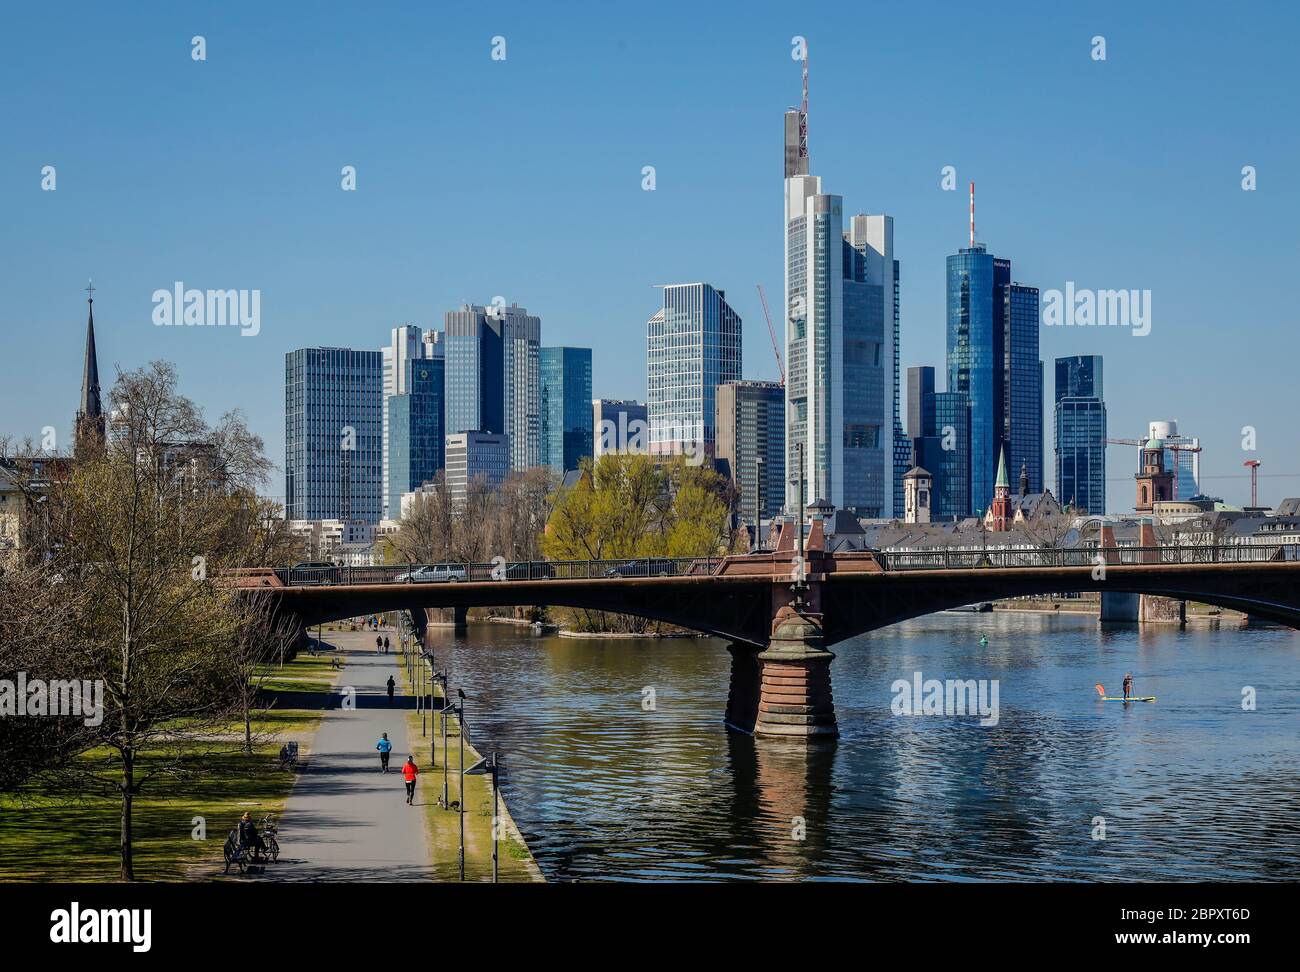 Frankfurt am Main, Hesse, Germany - Walkers on the banks of the Main during the Corona crisis with a ban on contact, in the back skyline of Frankfurt Stock Photo